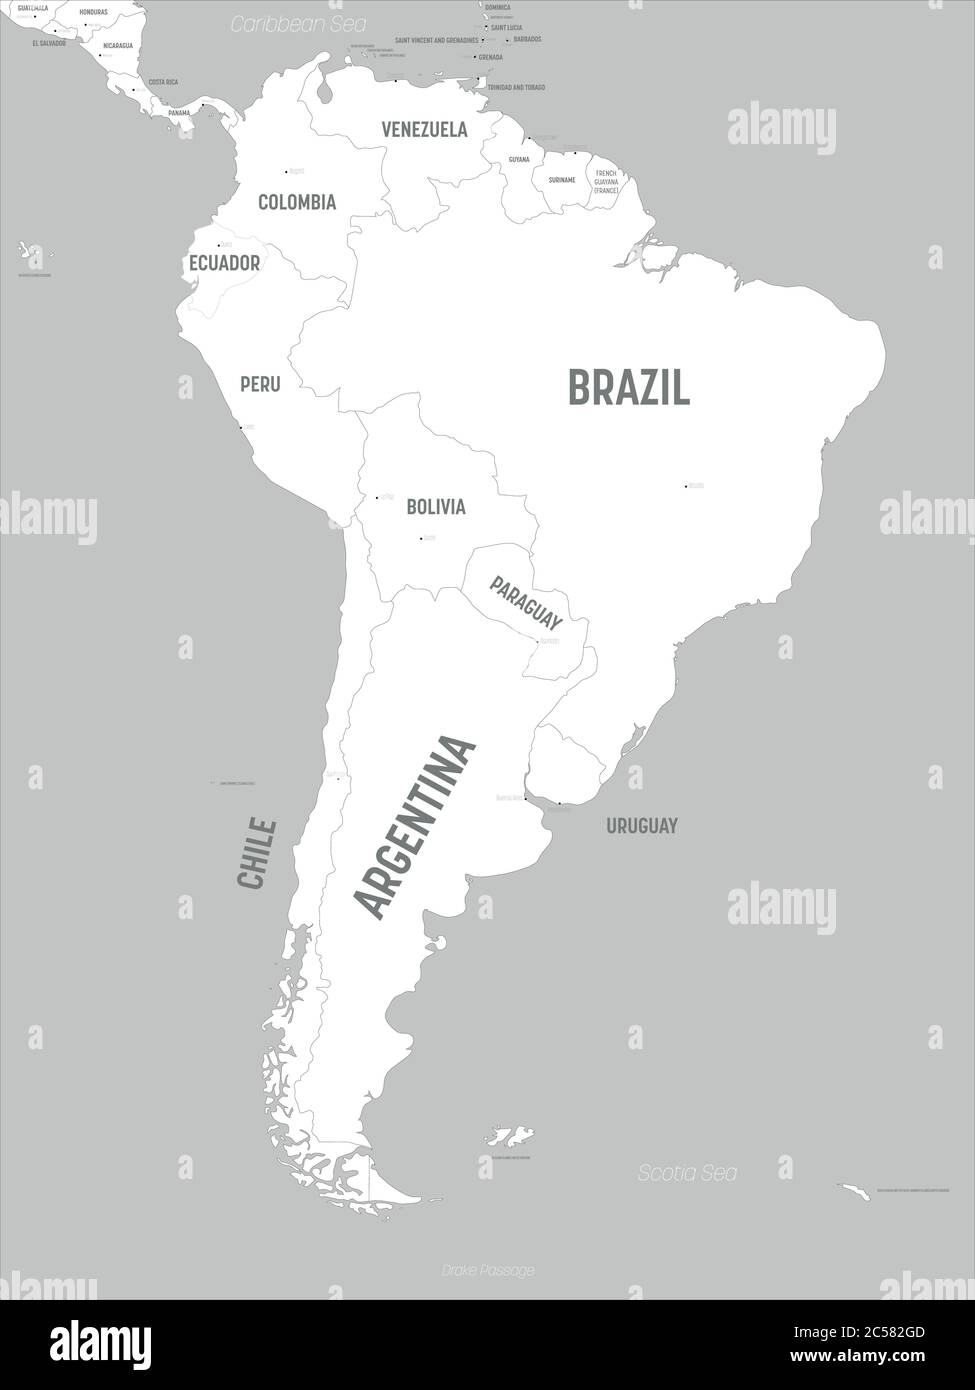 South America map - white lands and grey water. High detailed political map South American continent with country, capital, ocean and sea names labeling. Stock Vector